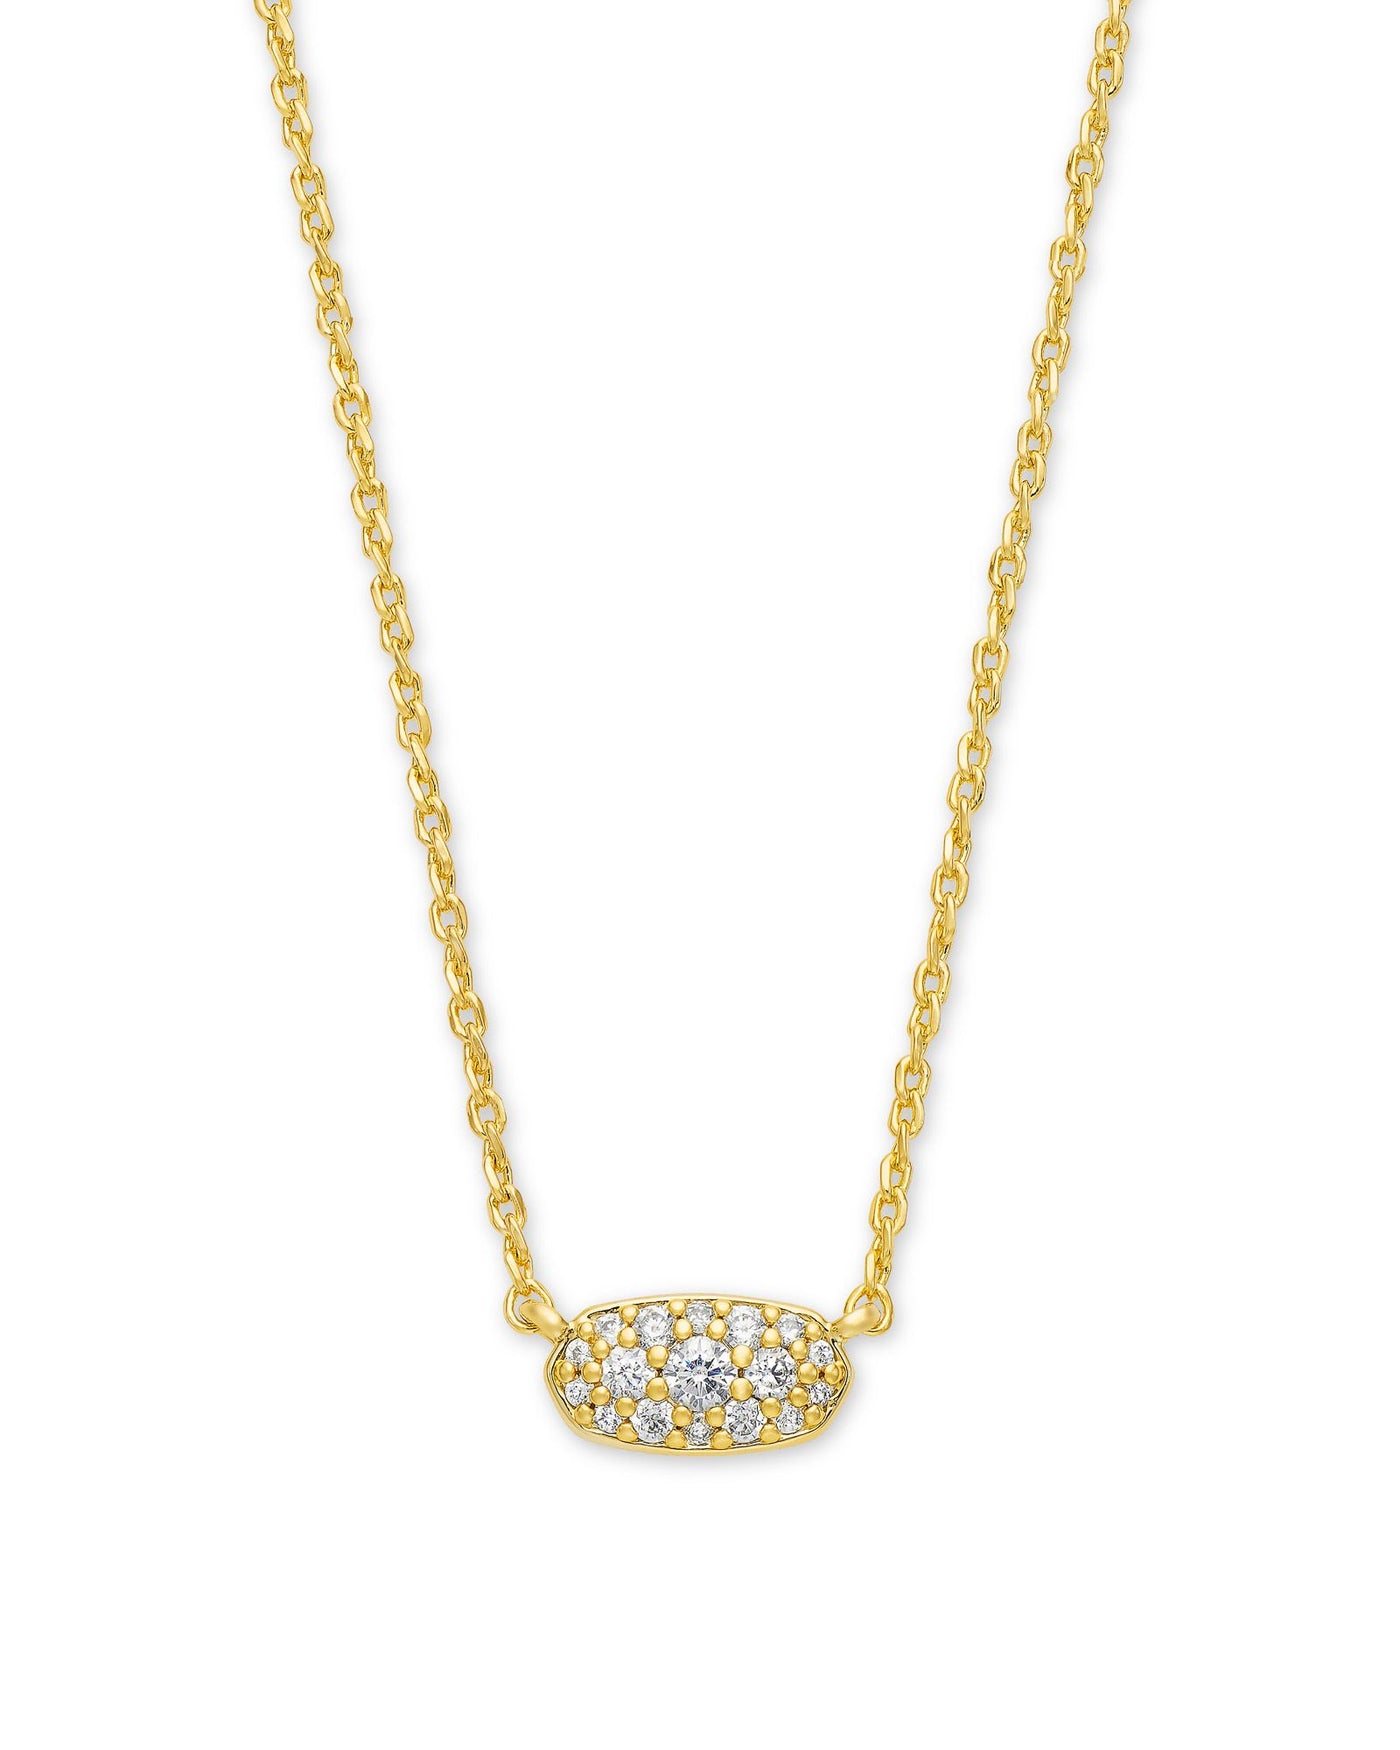 Kendra Scott Grayson Gold Pendant Necklace in White Crystal-Necklaces-Kendra Scott-Market Street Nest, Fashionable Clothing, Shoes and Home Décor Located in Mabank, TX